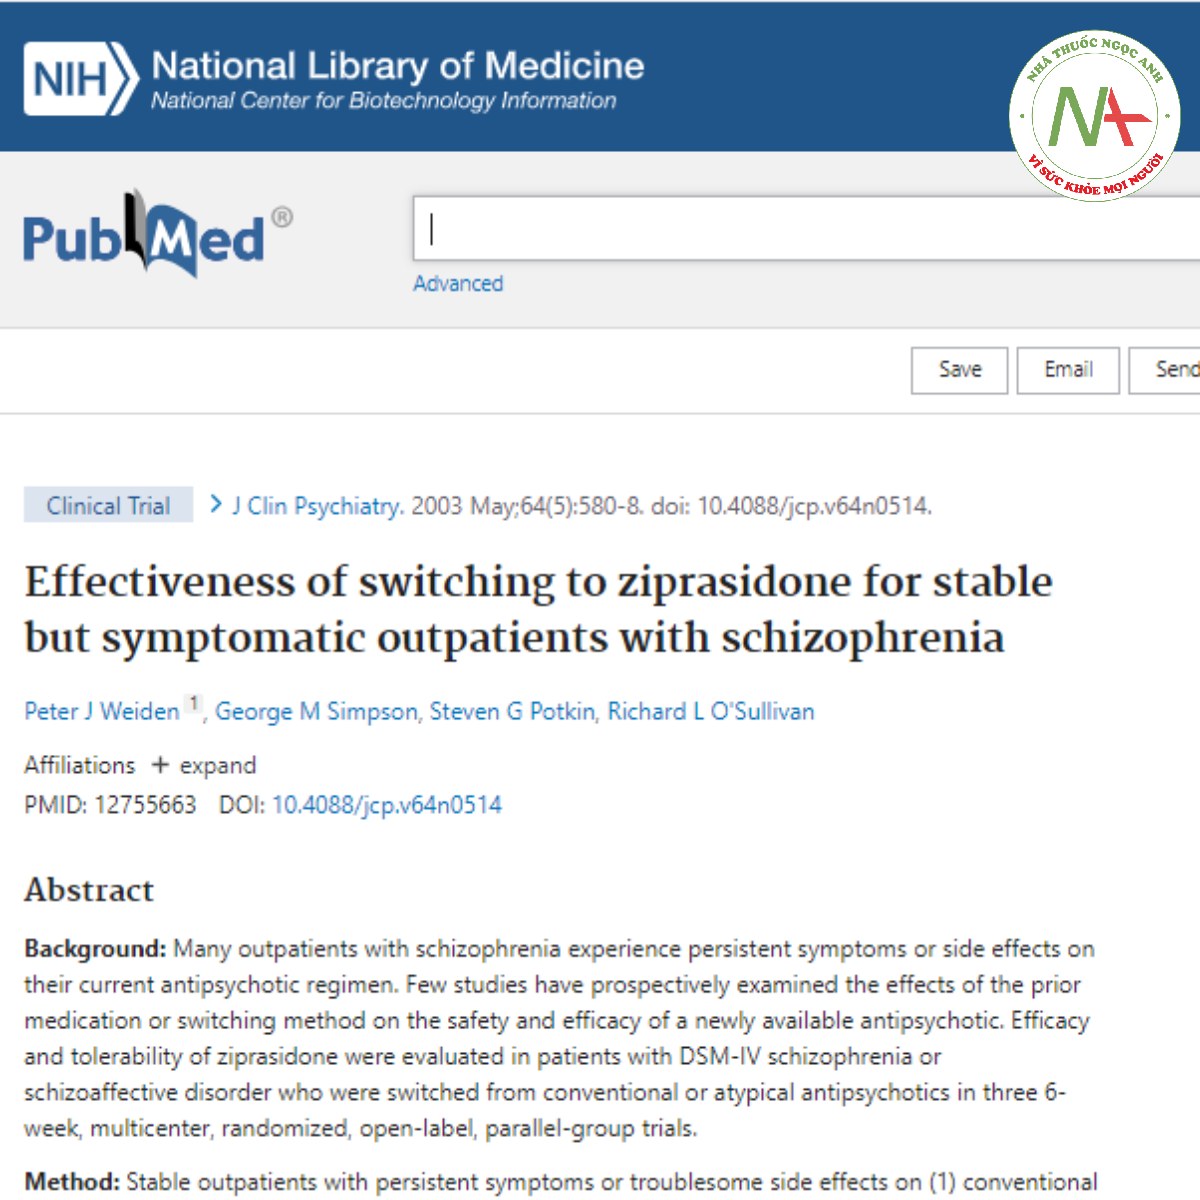 Effectiveness of switching to ziprasidone for stable but symptomatic outpatients with schizophrenia